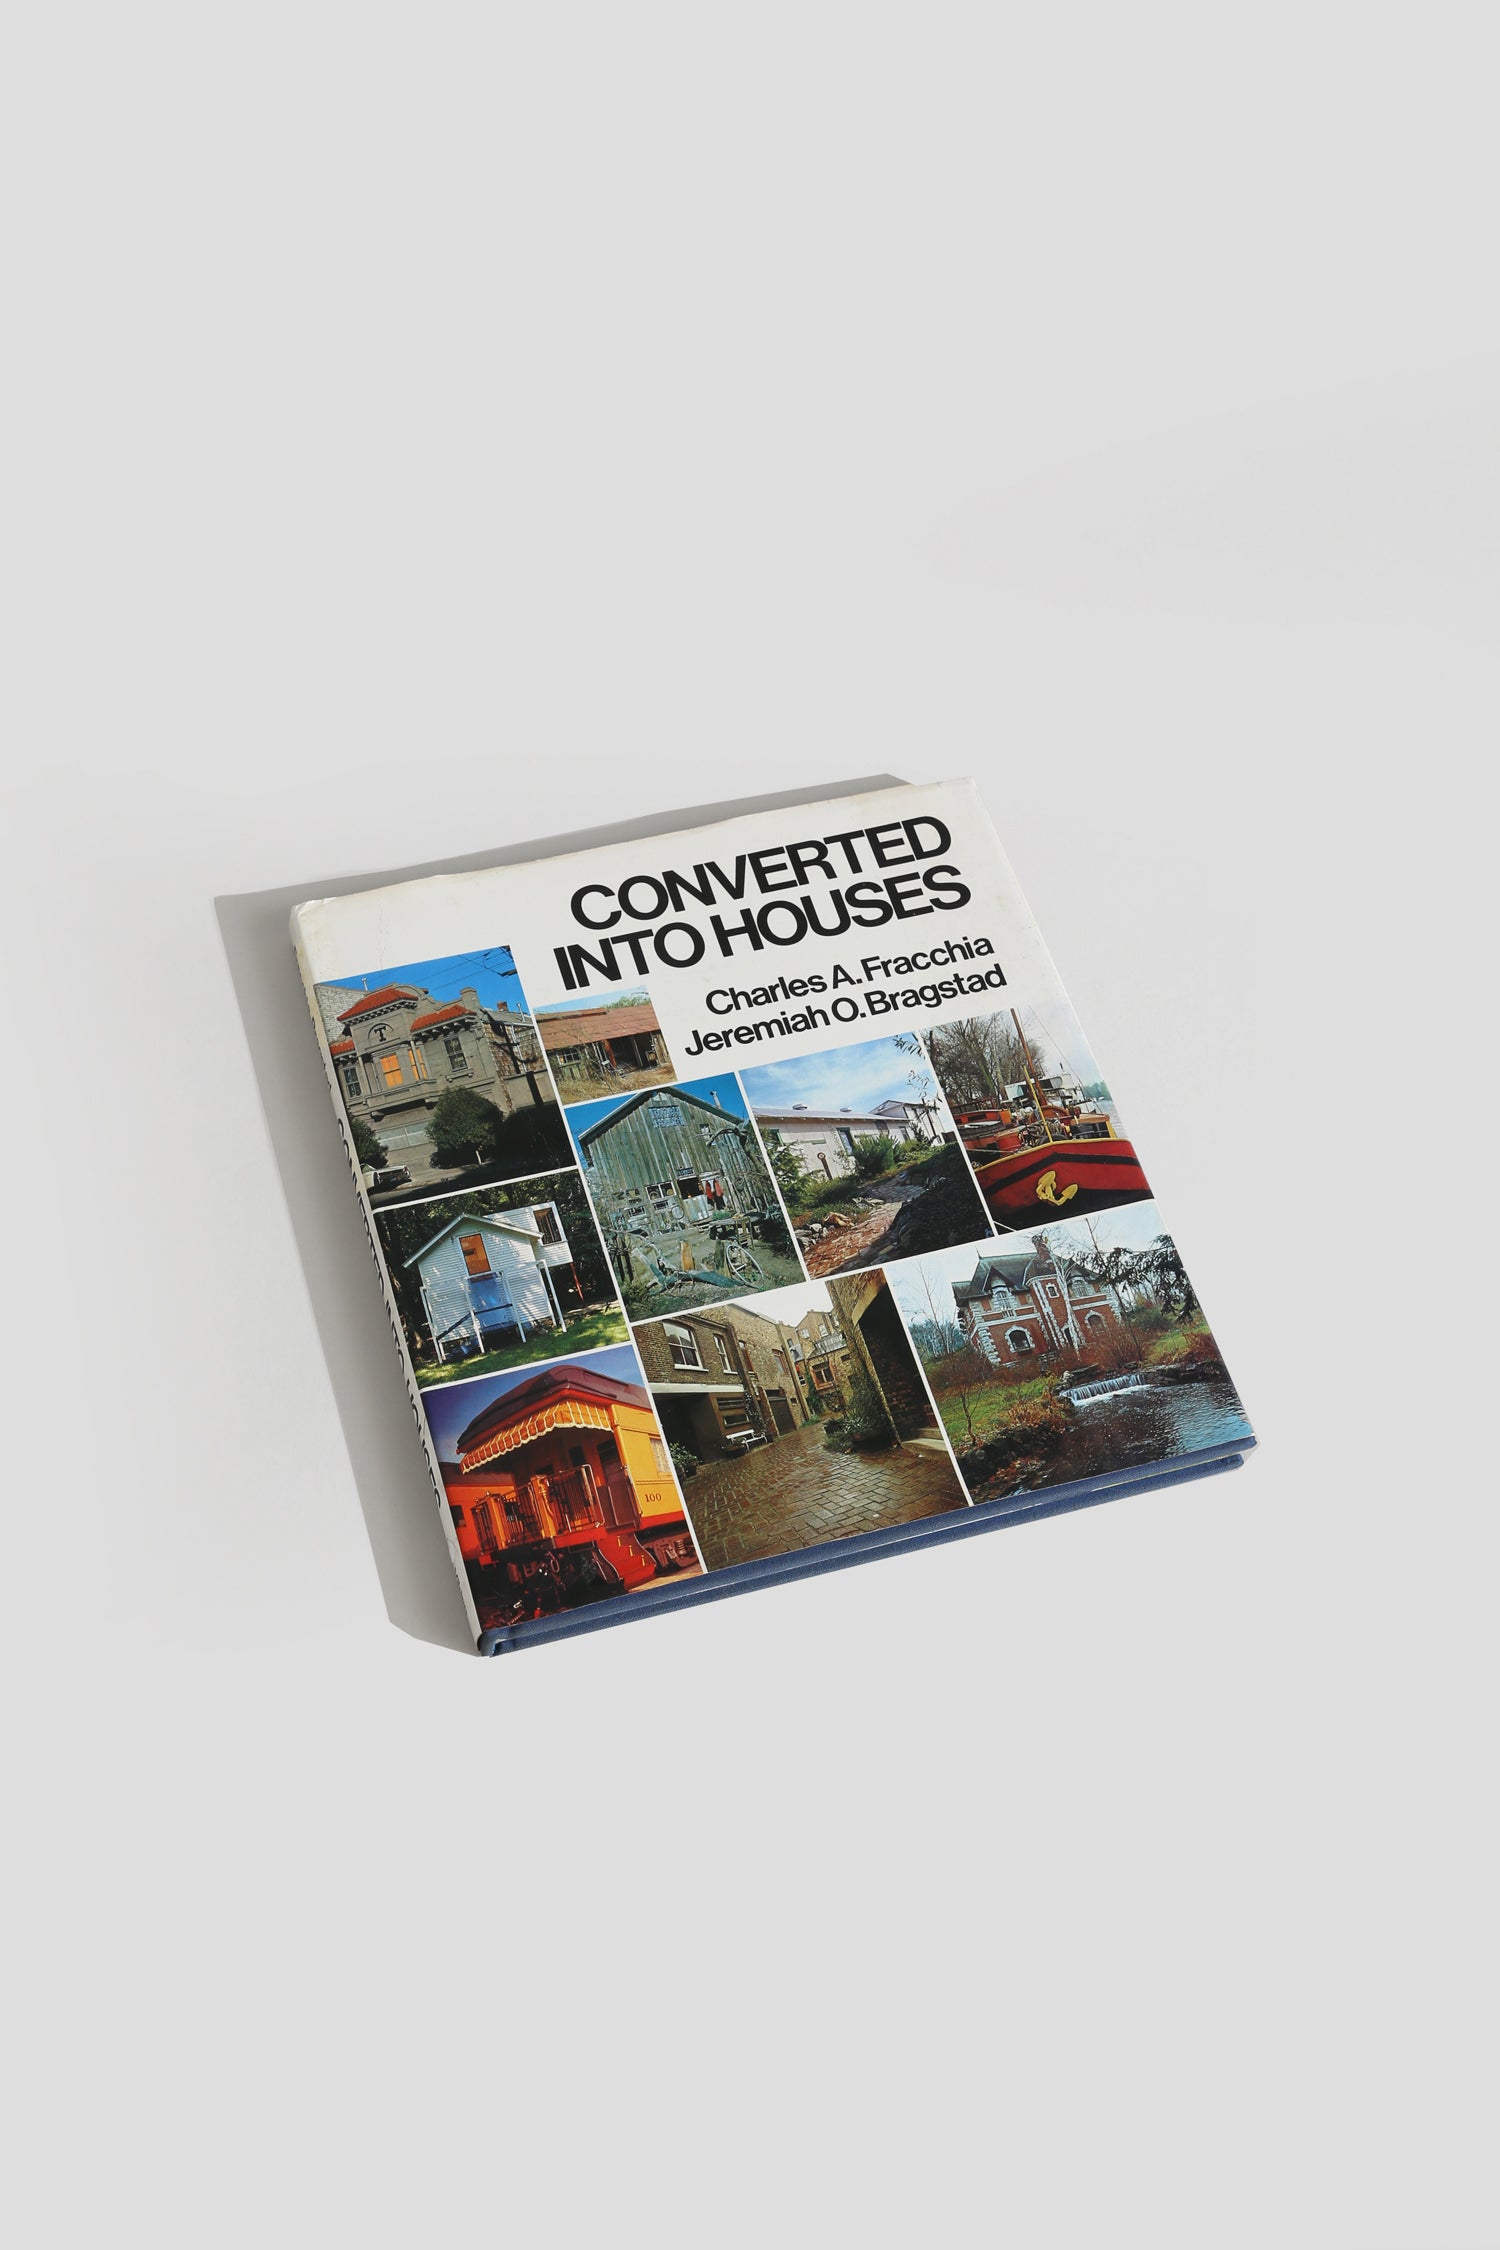 Converted into Houses Book